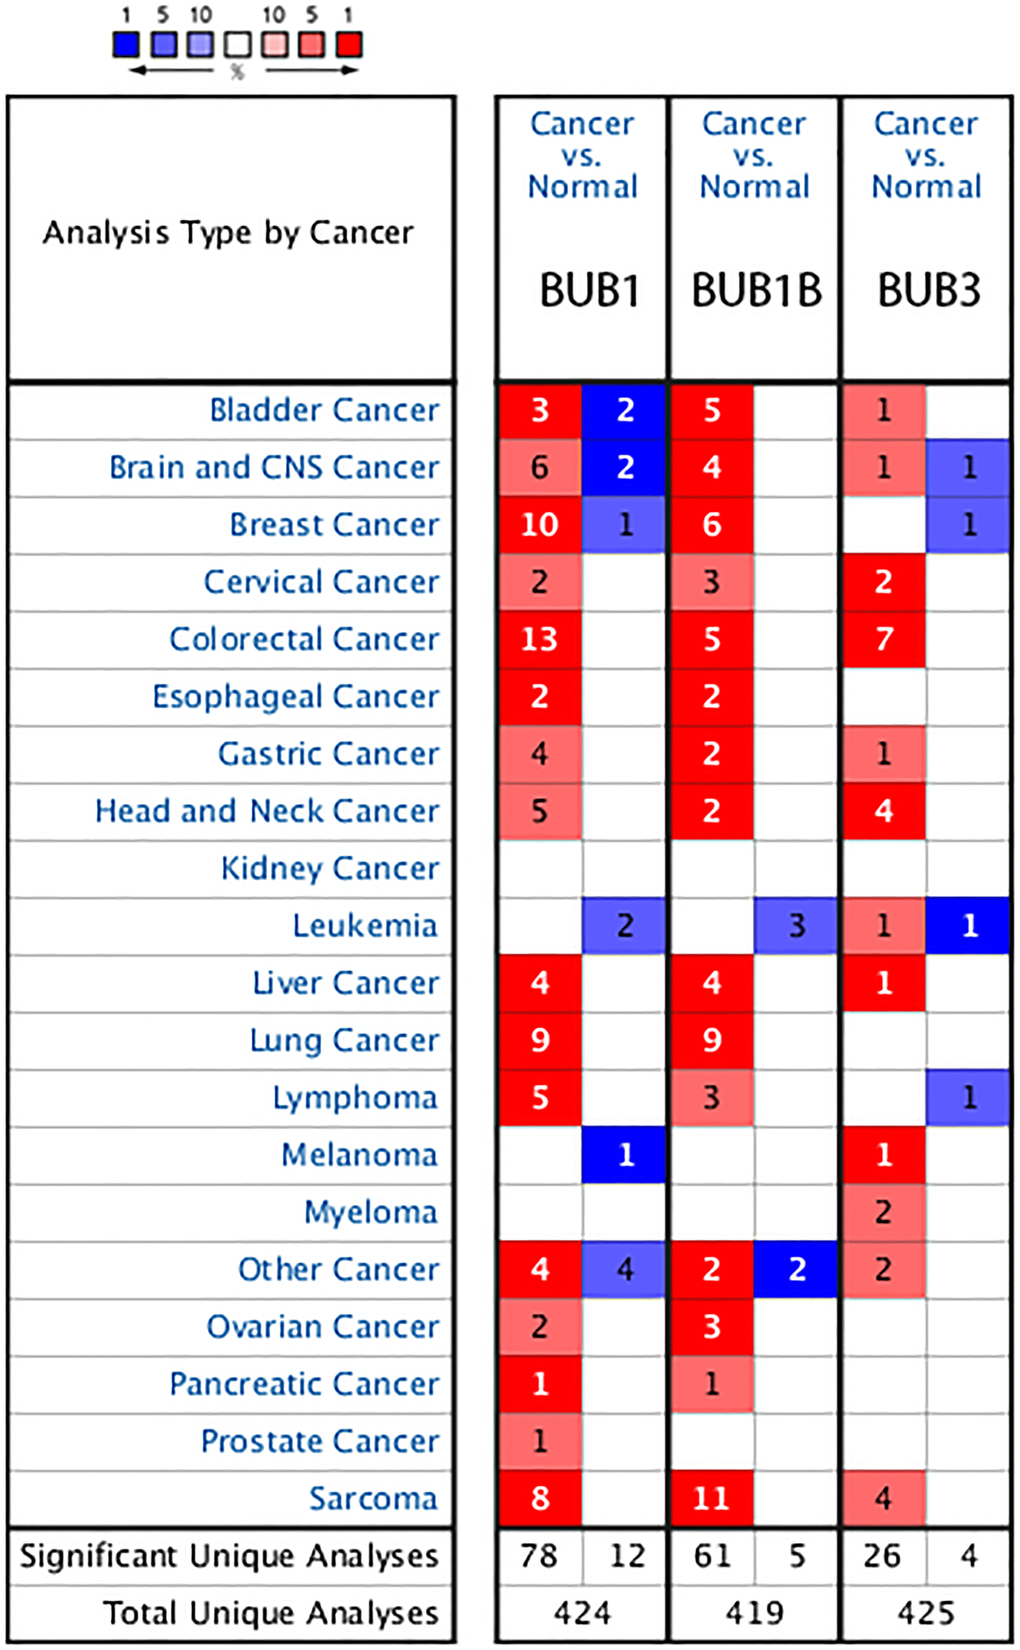 The transcription levels of BUB factors in different types of cancers (Oncomine). The BUB family of genes are overexpressed in many types of cancers including Sarcoma. The red cells represent evidence of gene overexpression. The blue cells represent evidence of decreased gene expression. The number in each cell represents the amount of evidence. The deeper the color, the higher the significance.